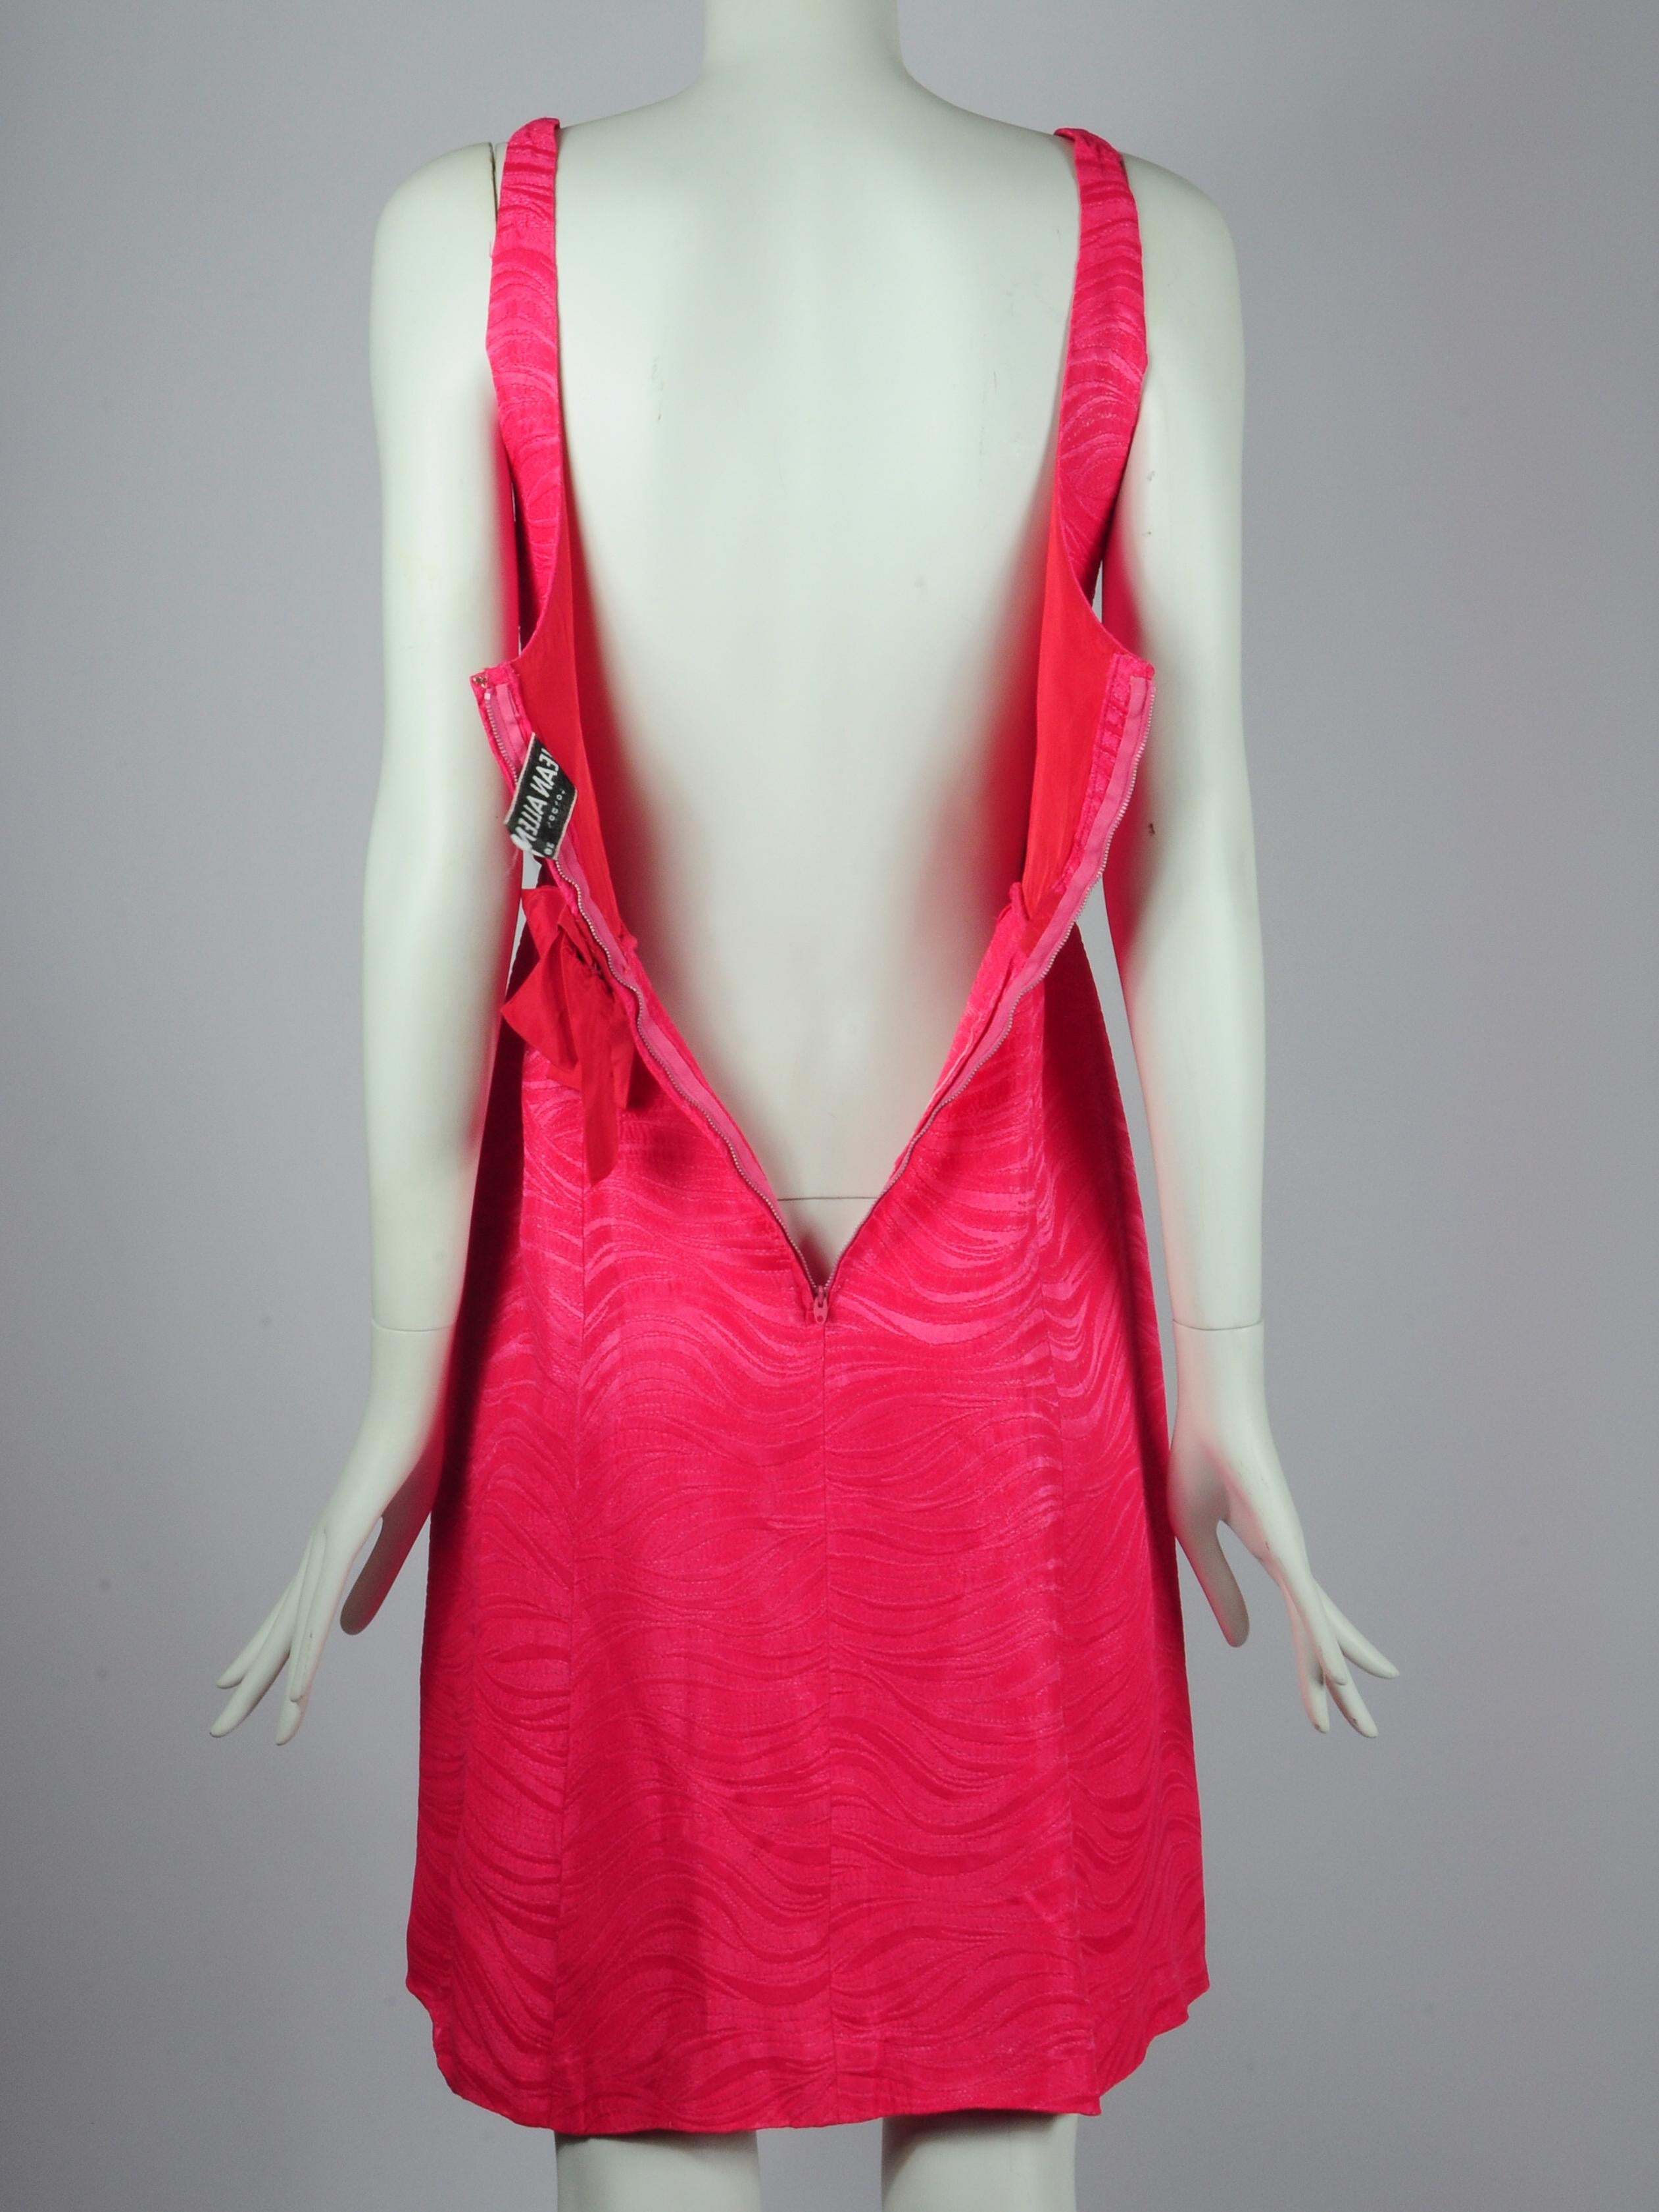 Jean Allen London Dress and Jacket Two Piece Set in Fuchsia Pink with Bow Detail For Sale 6